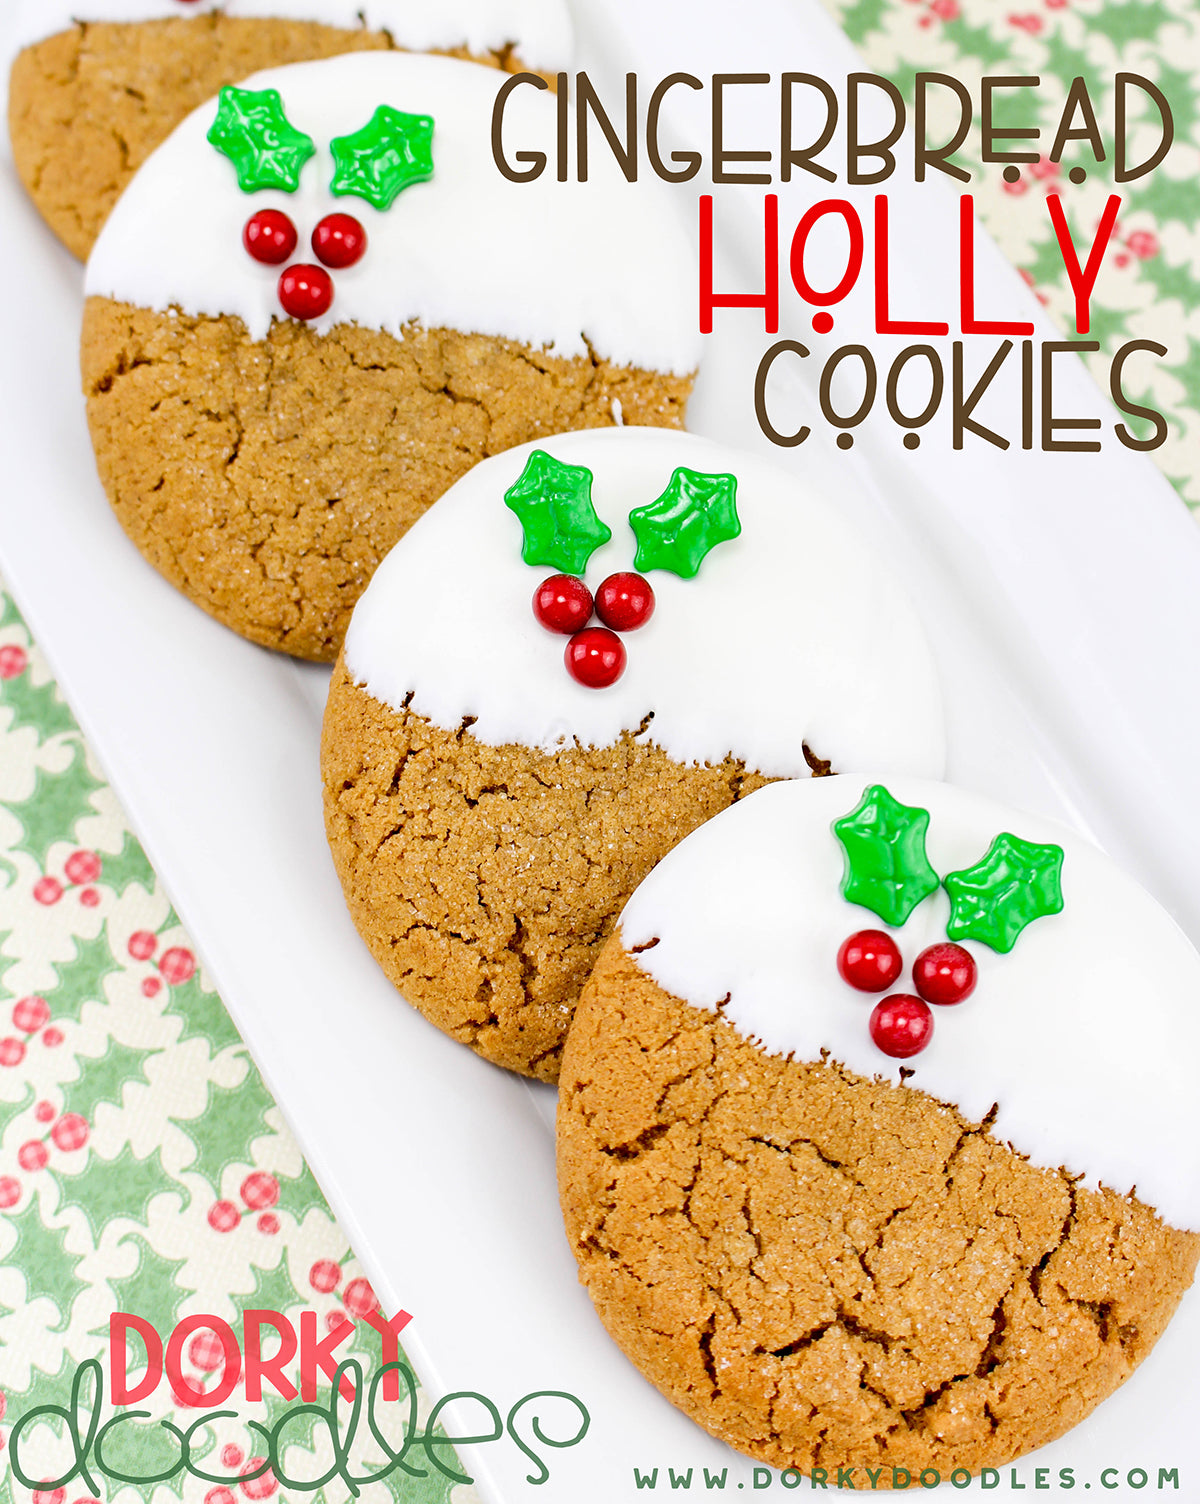 gingerbread holly Christmas cookies recipe